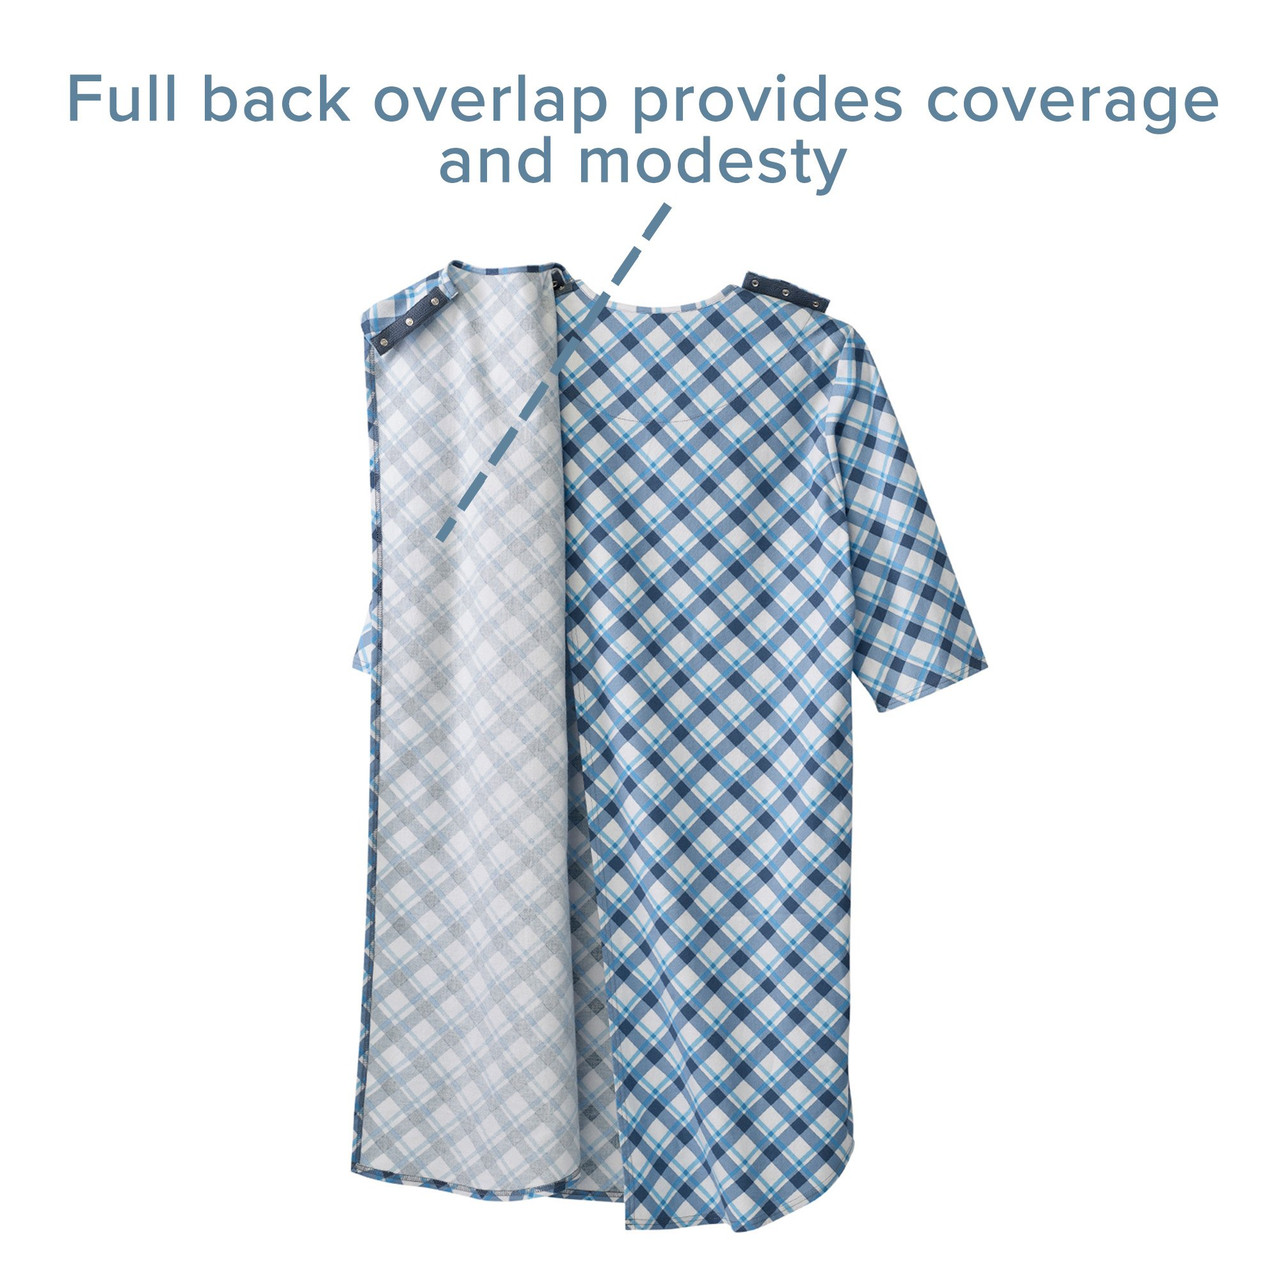 How to Turn a Nightgown Into a Hospital Gown | Stray Thoughts